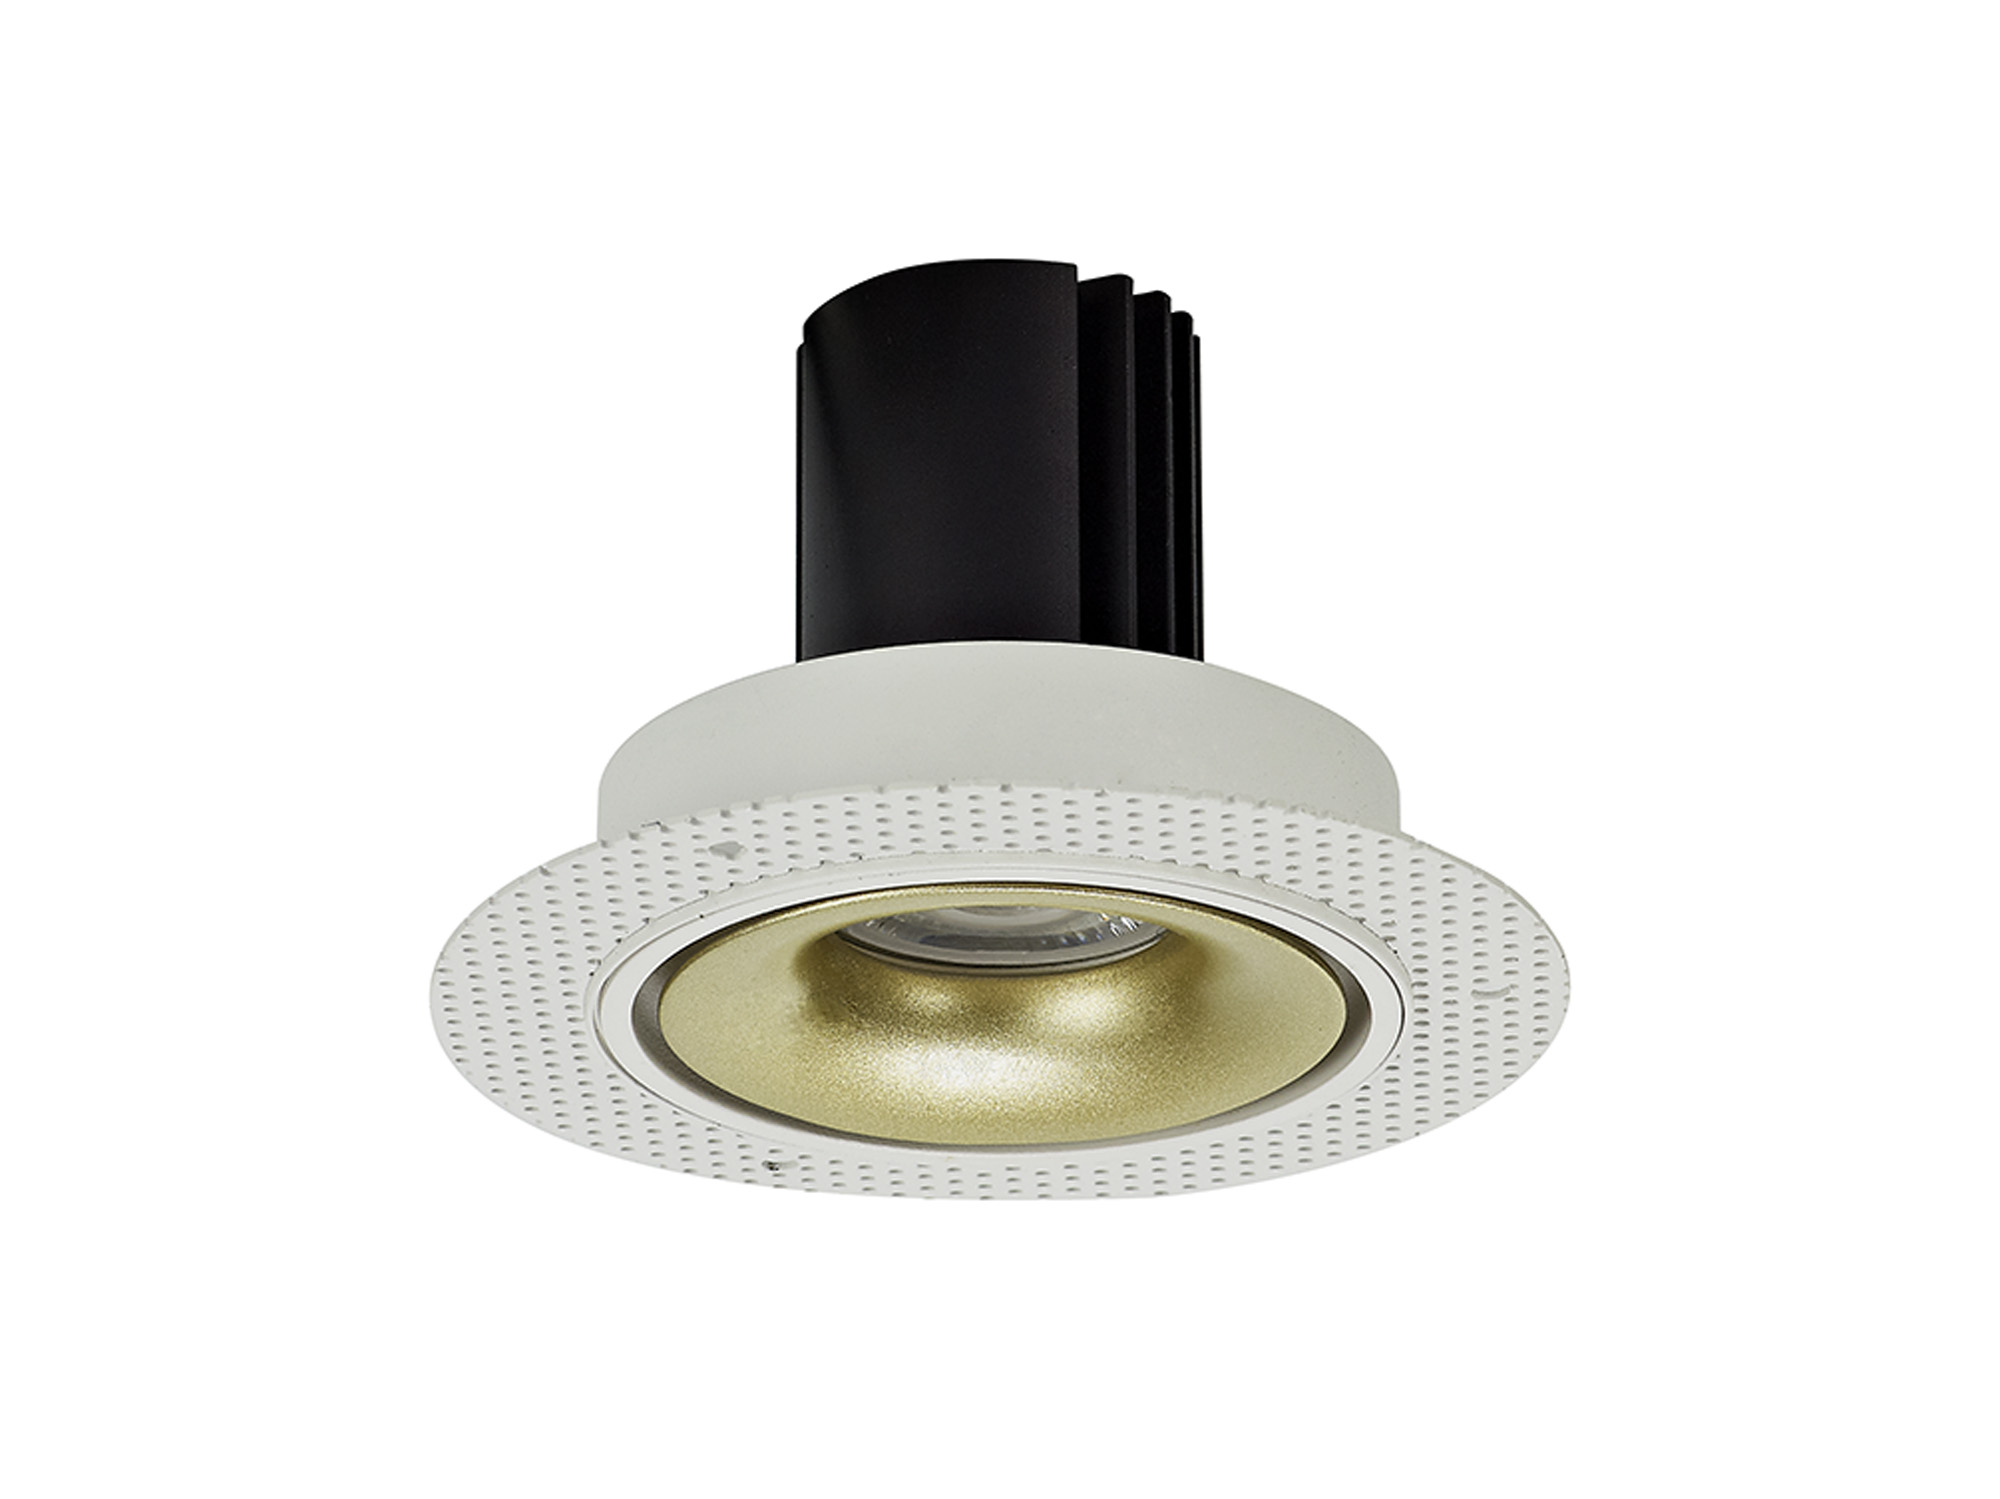 DM202180  Bolor T 12 Tridonic Powered 12W 2700K 1200lm 12° CRI>90 LED Engine White/Gold Trimless Fixed Recessed Spotlight, IP20